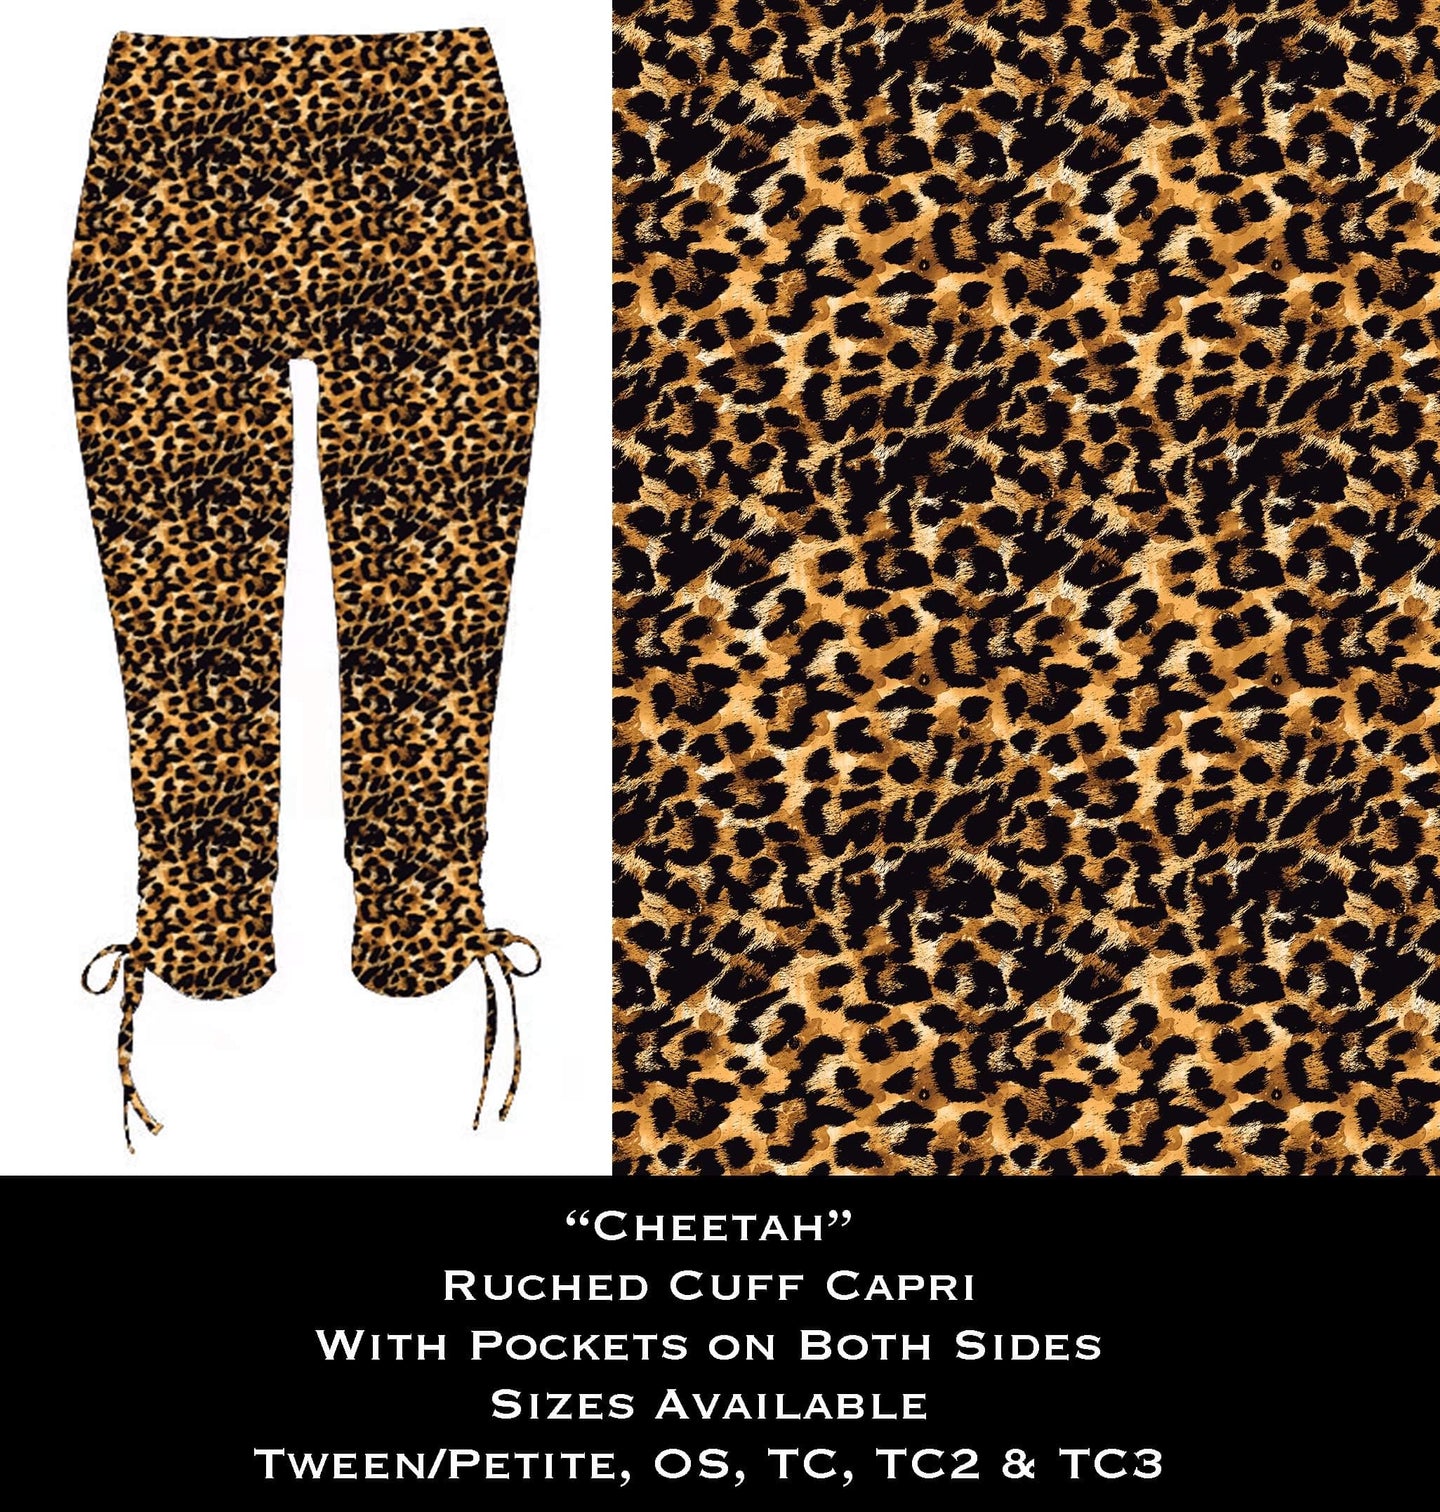 Cheetah Ruched Cuff Capris with Side Pockets - Preorder Closing 5/25 ETA: Early July